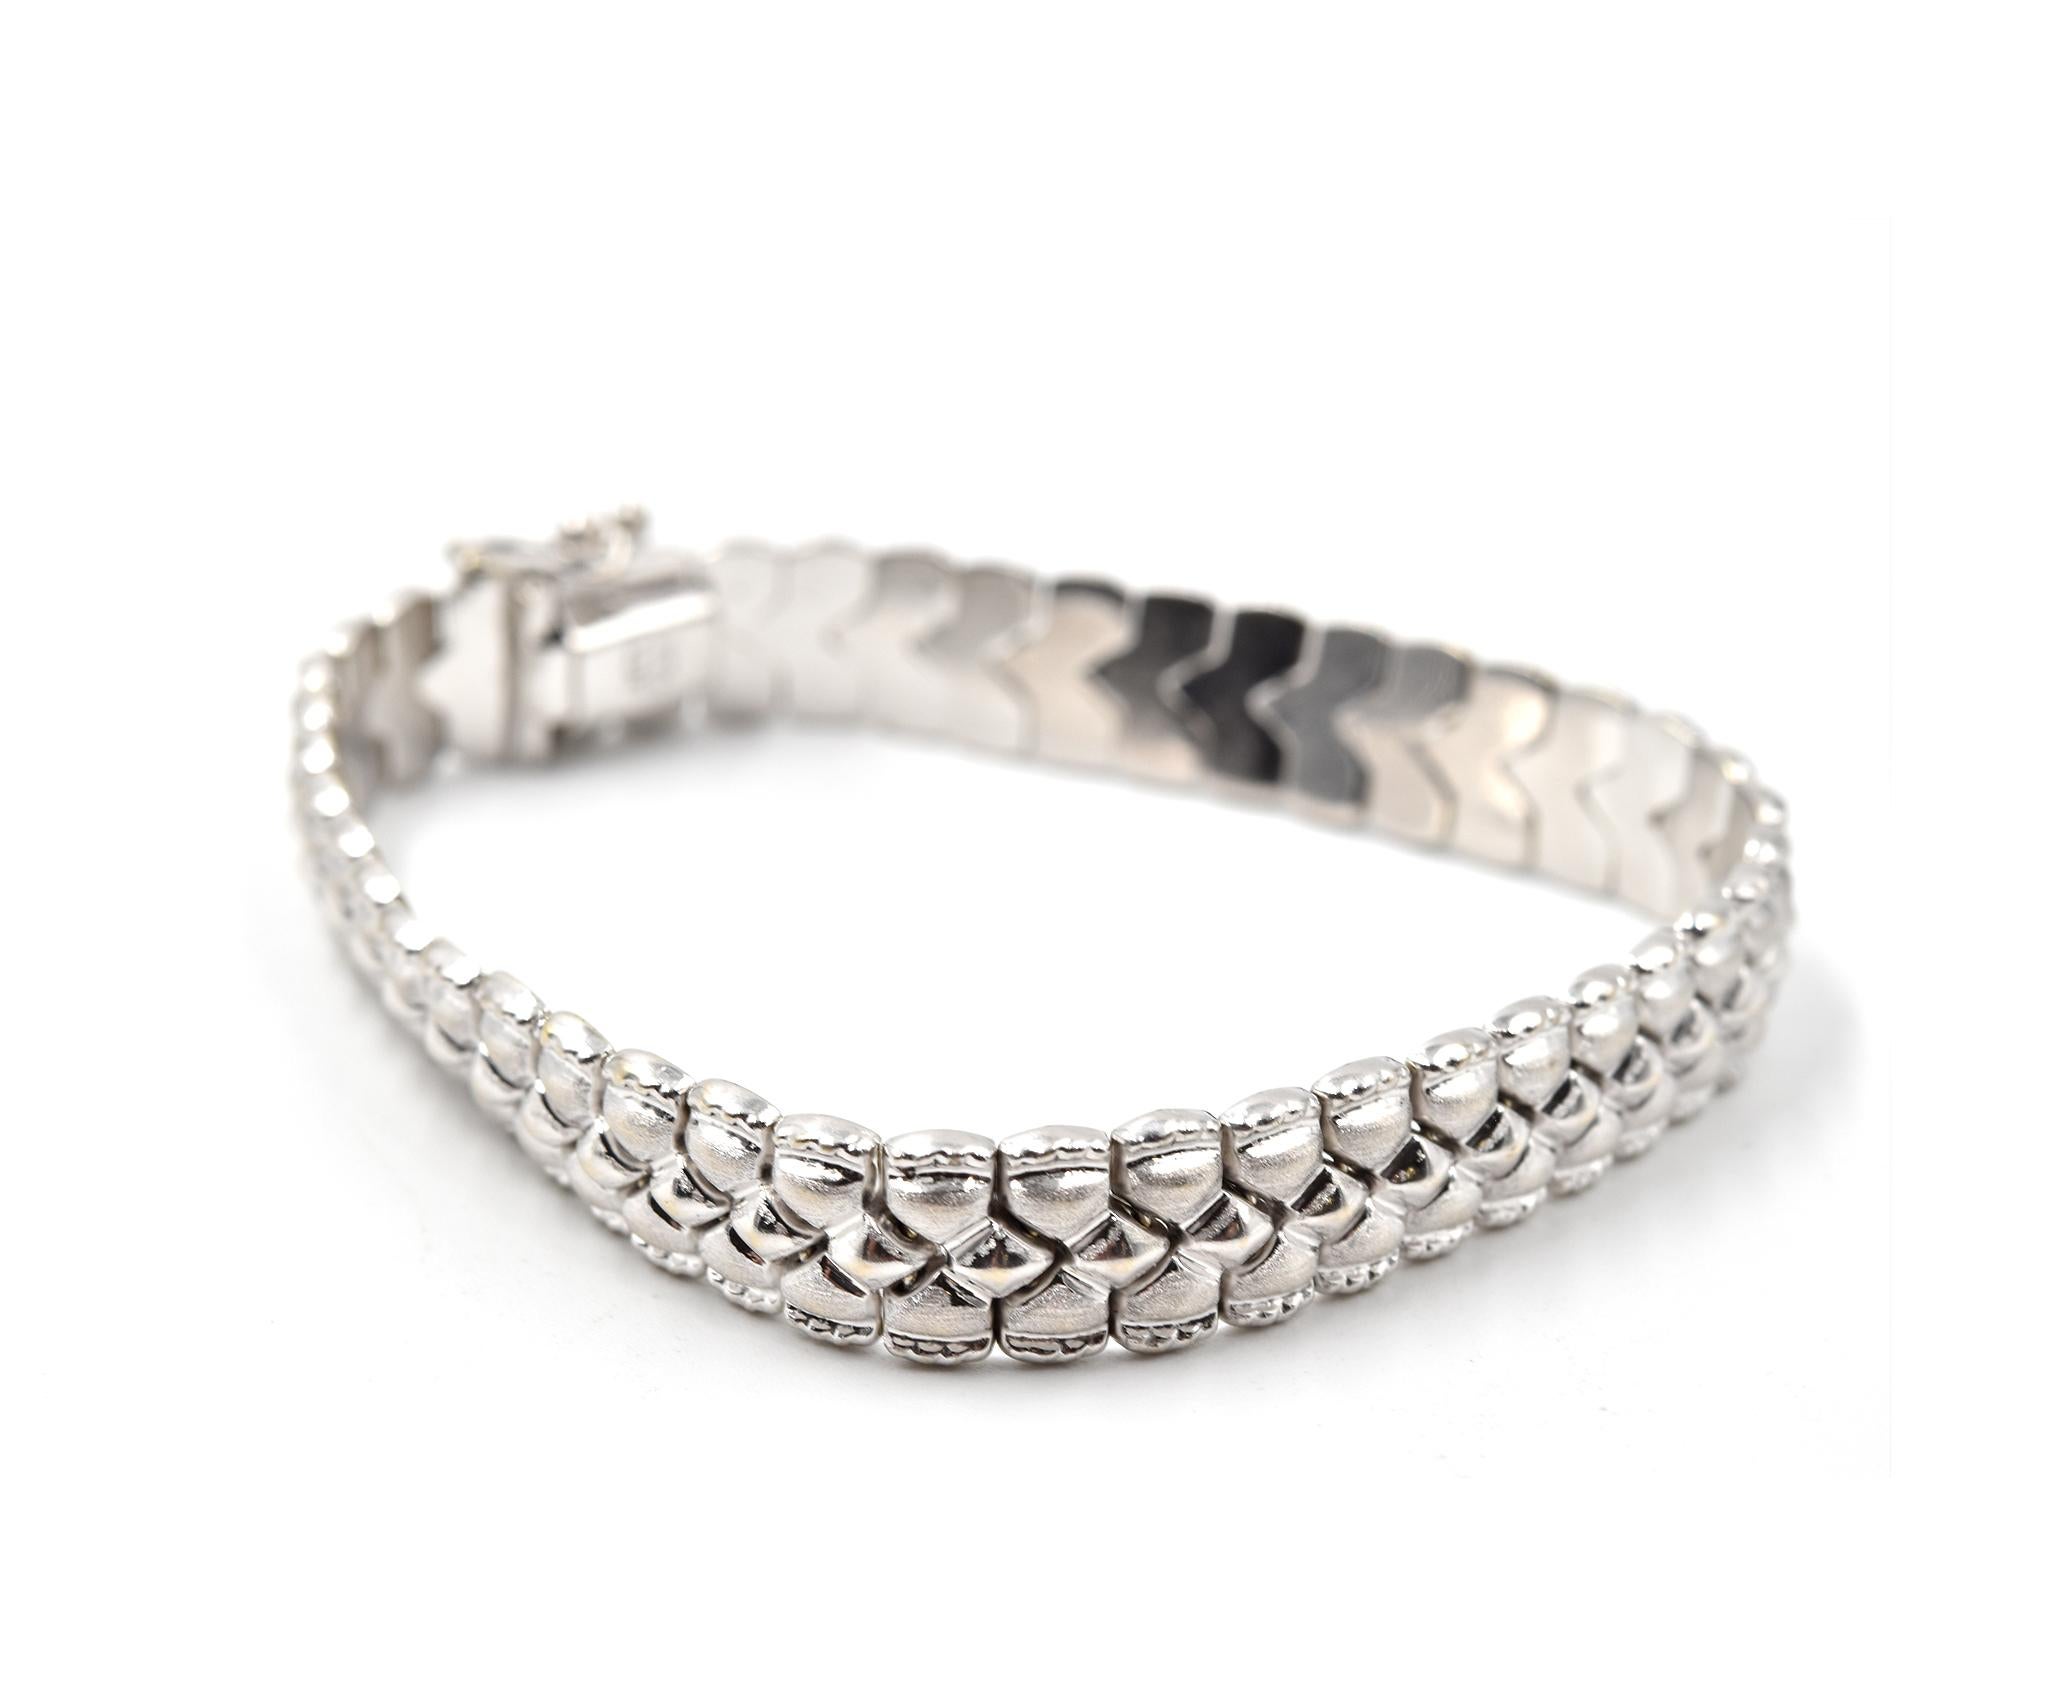 Designer: custom design
Material: 14k white gold
Dimensions: bracelet is 7-inch long and 9mm wide 
Weight: 12.80 grams
